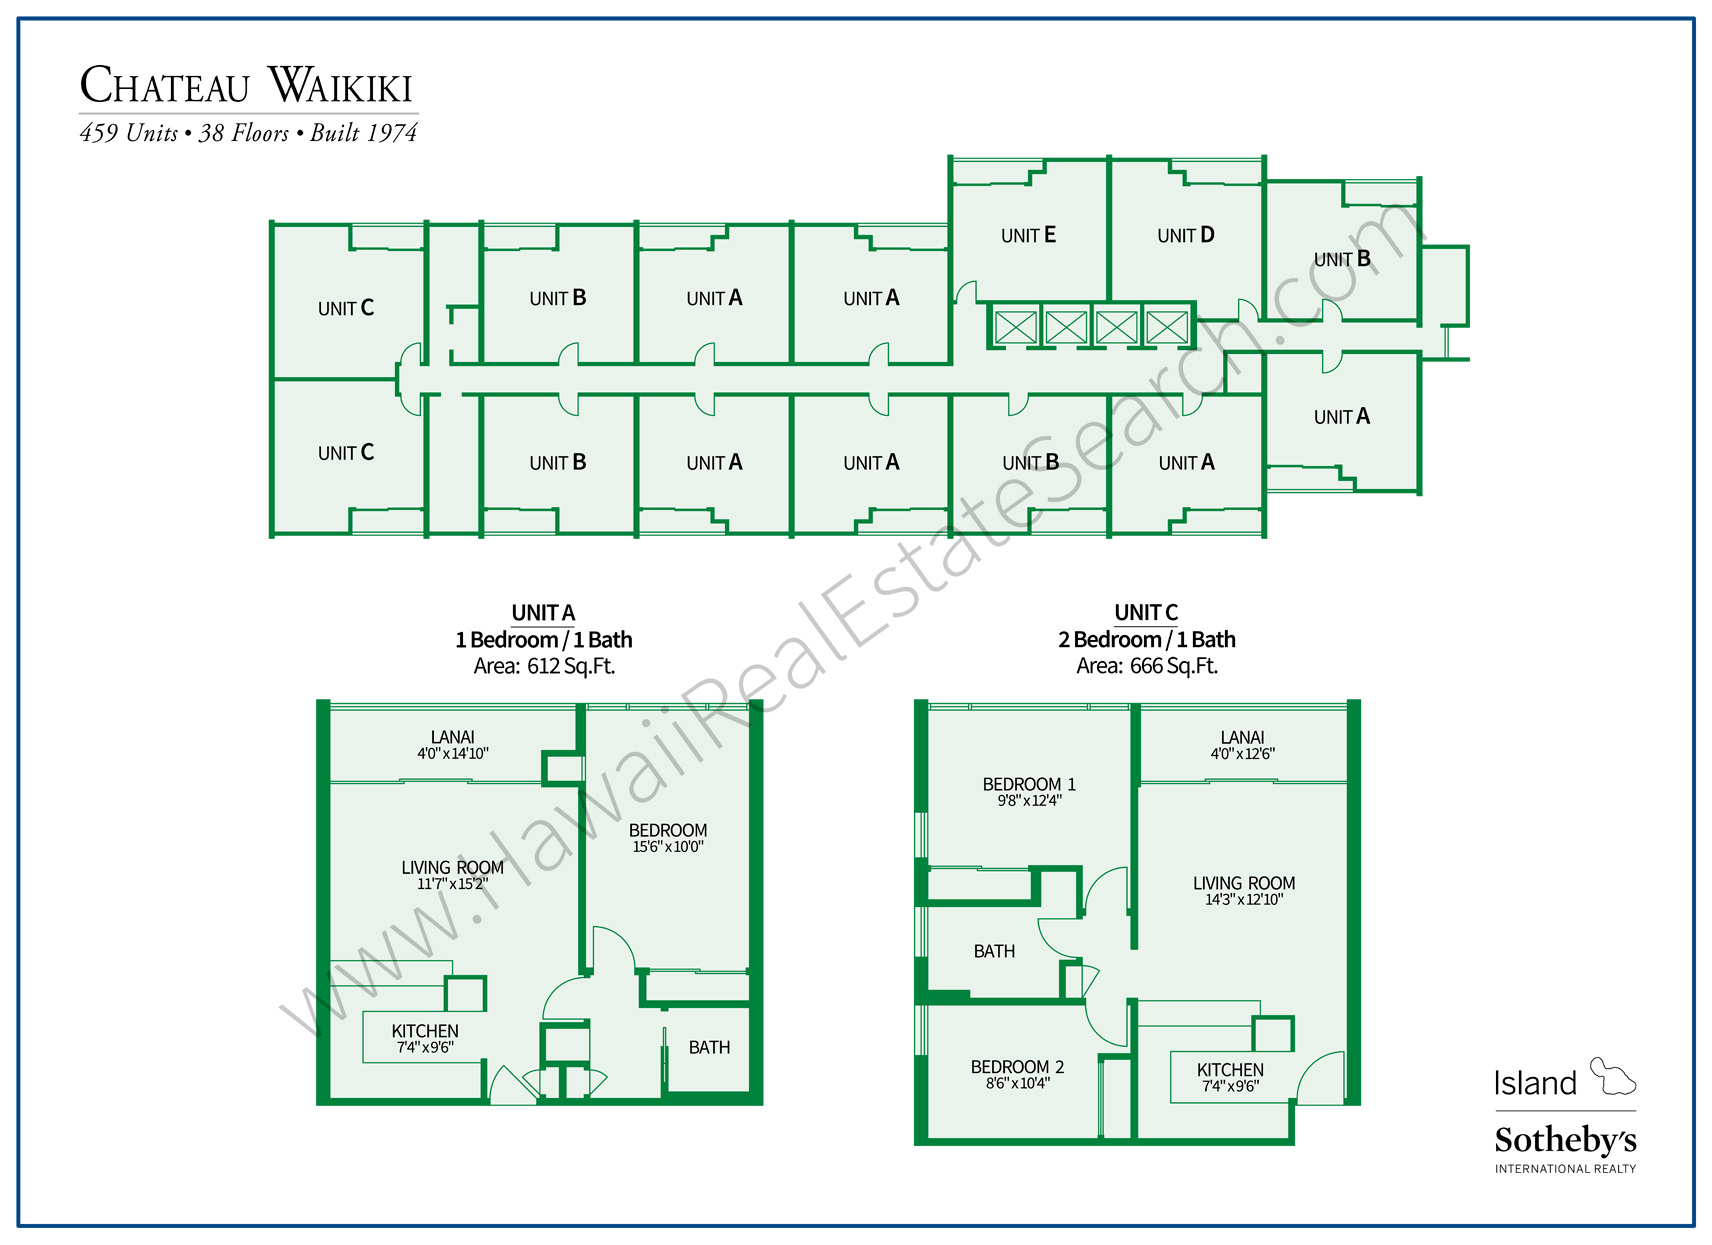 Chateau Waikiki Property Map and Floor Plans